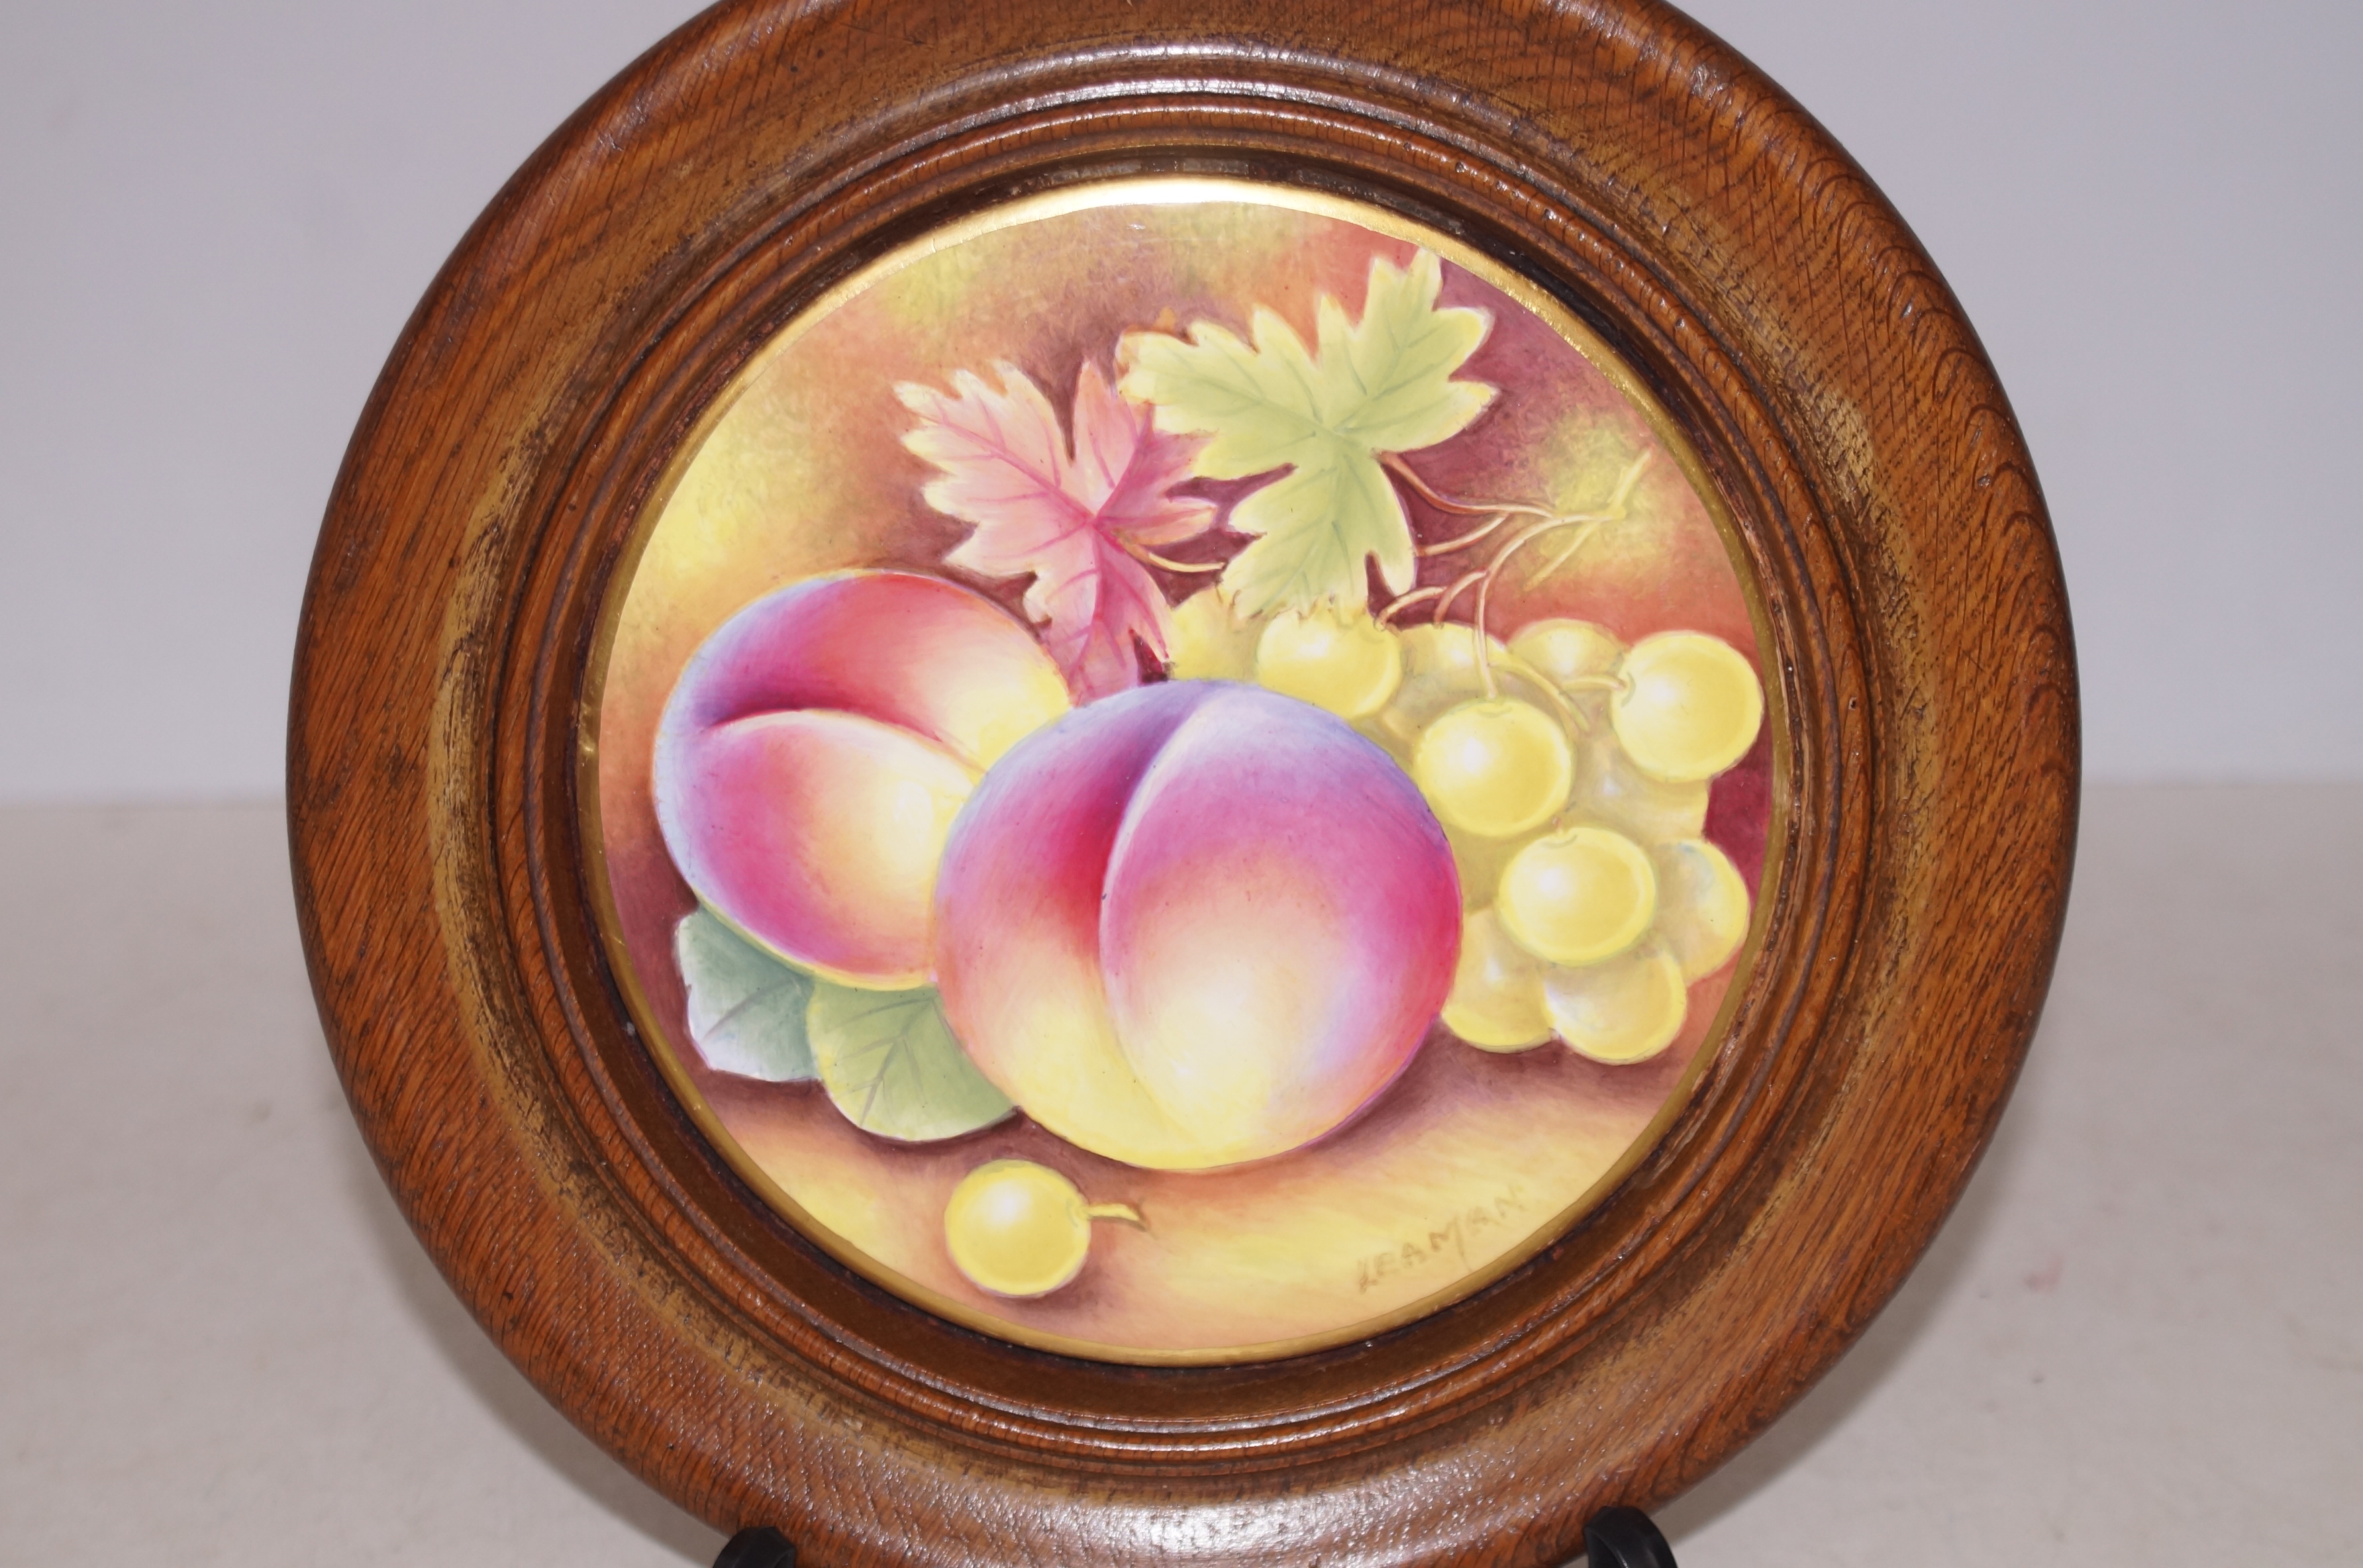 Hand painted fruit round plaque signed Leaman